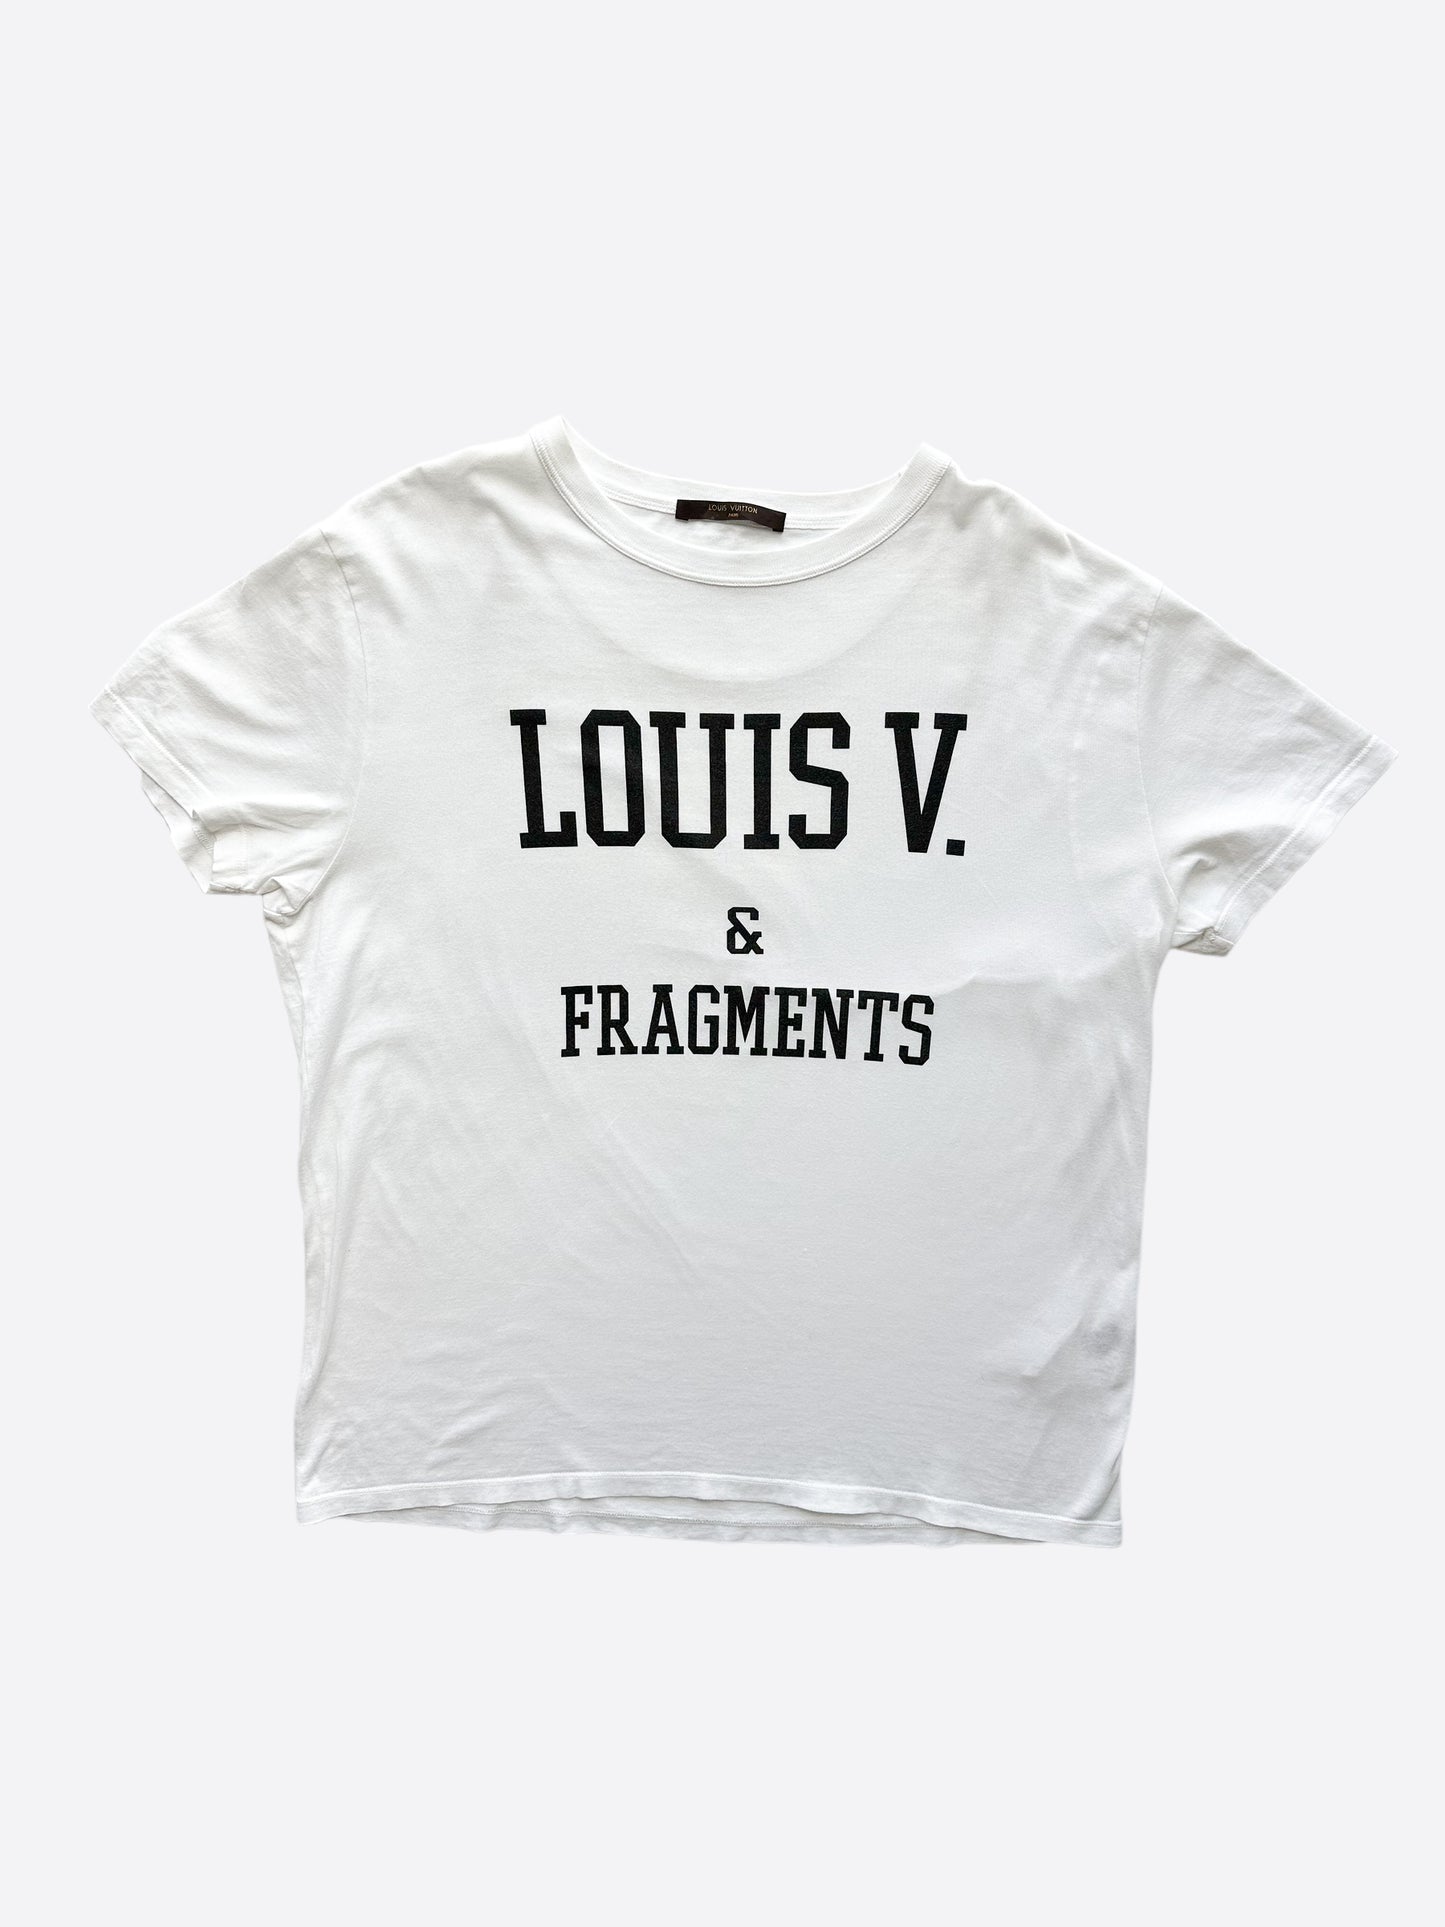 Every Single Piece From The Louis Vuitton X Fragment Collection